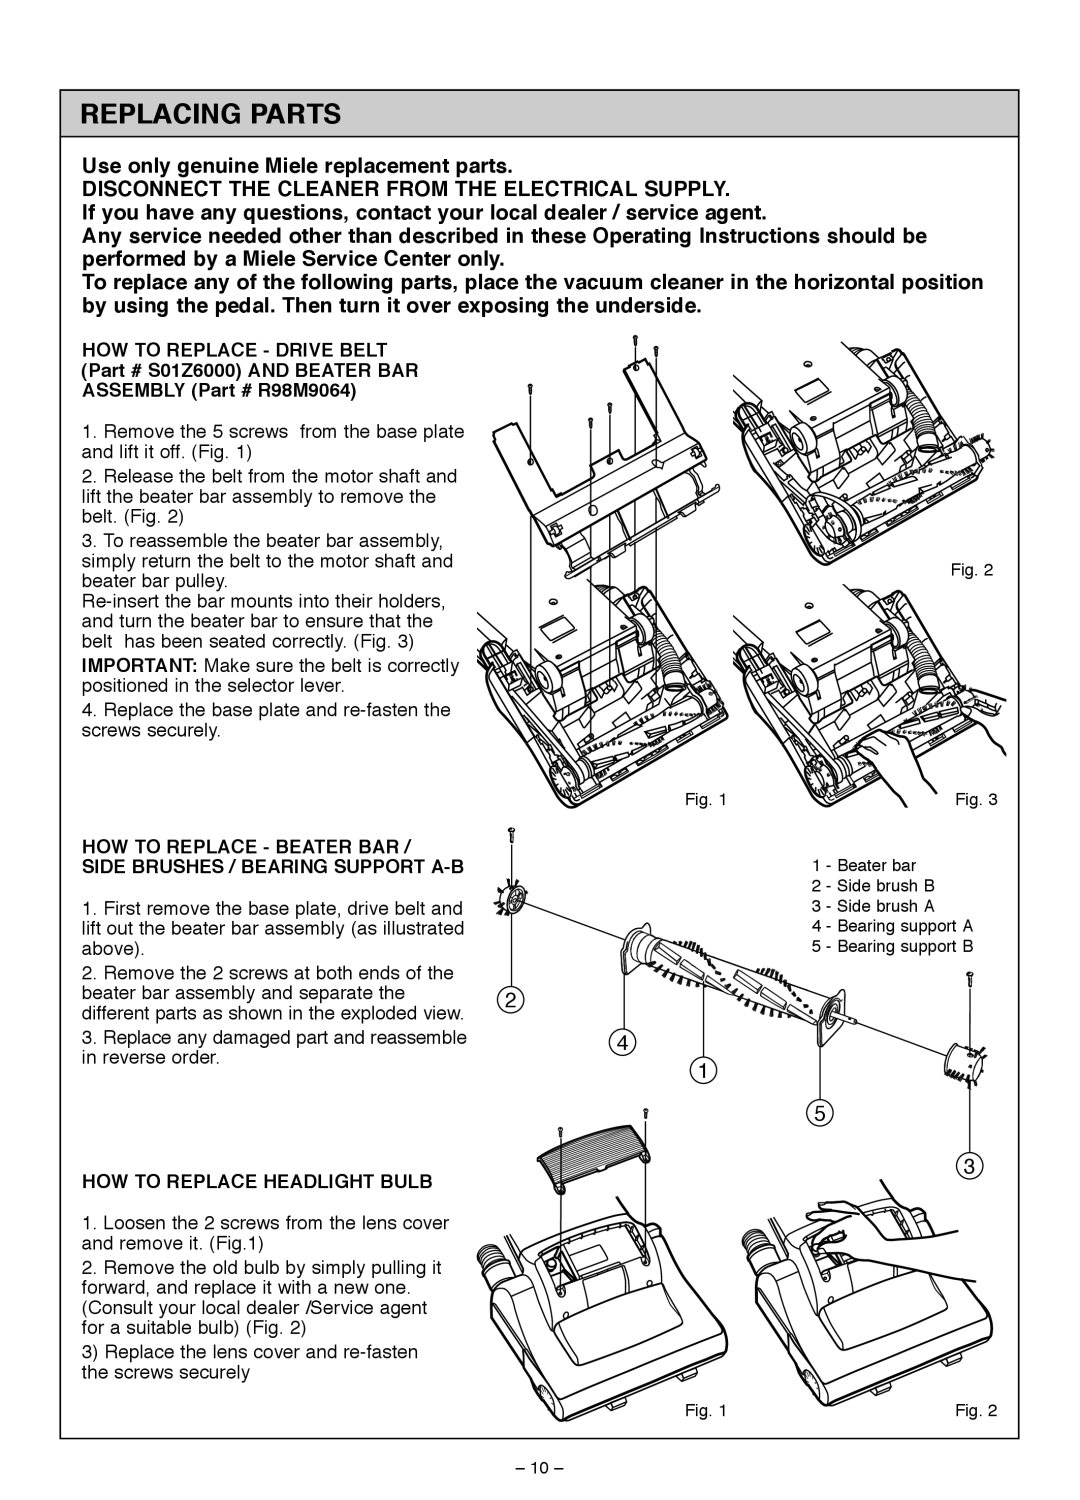 Miele S185 important safety instructions Replacing Parts 